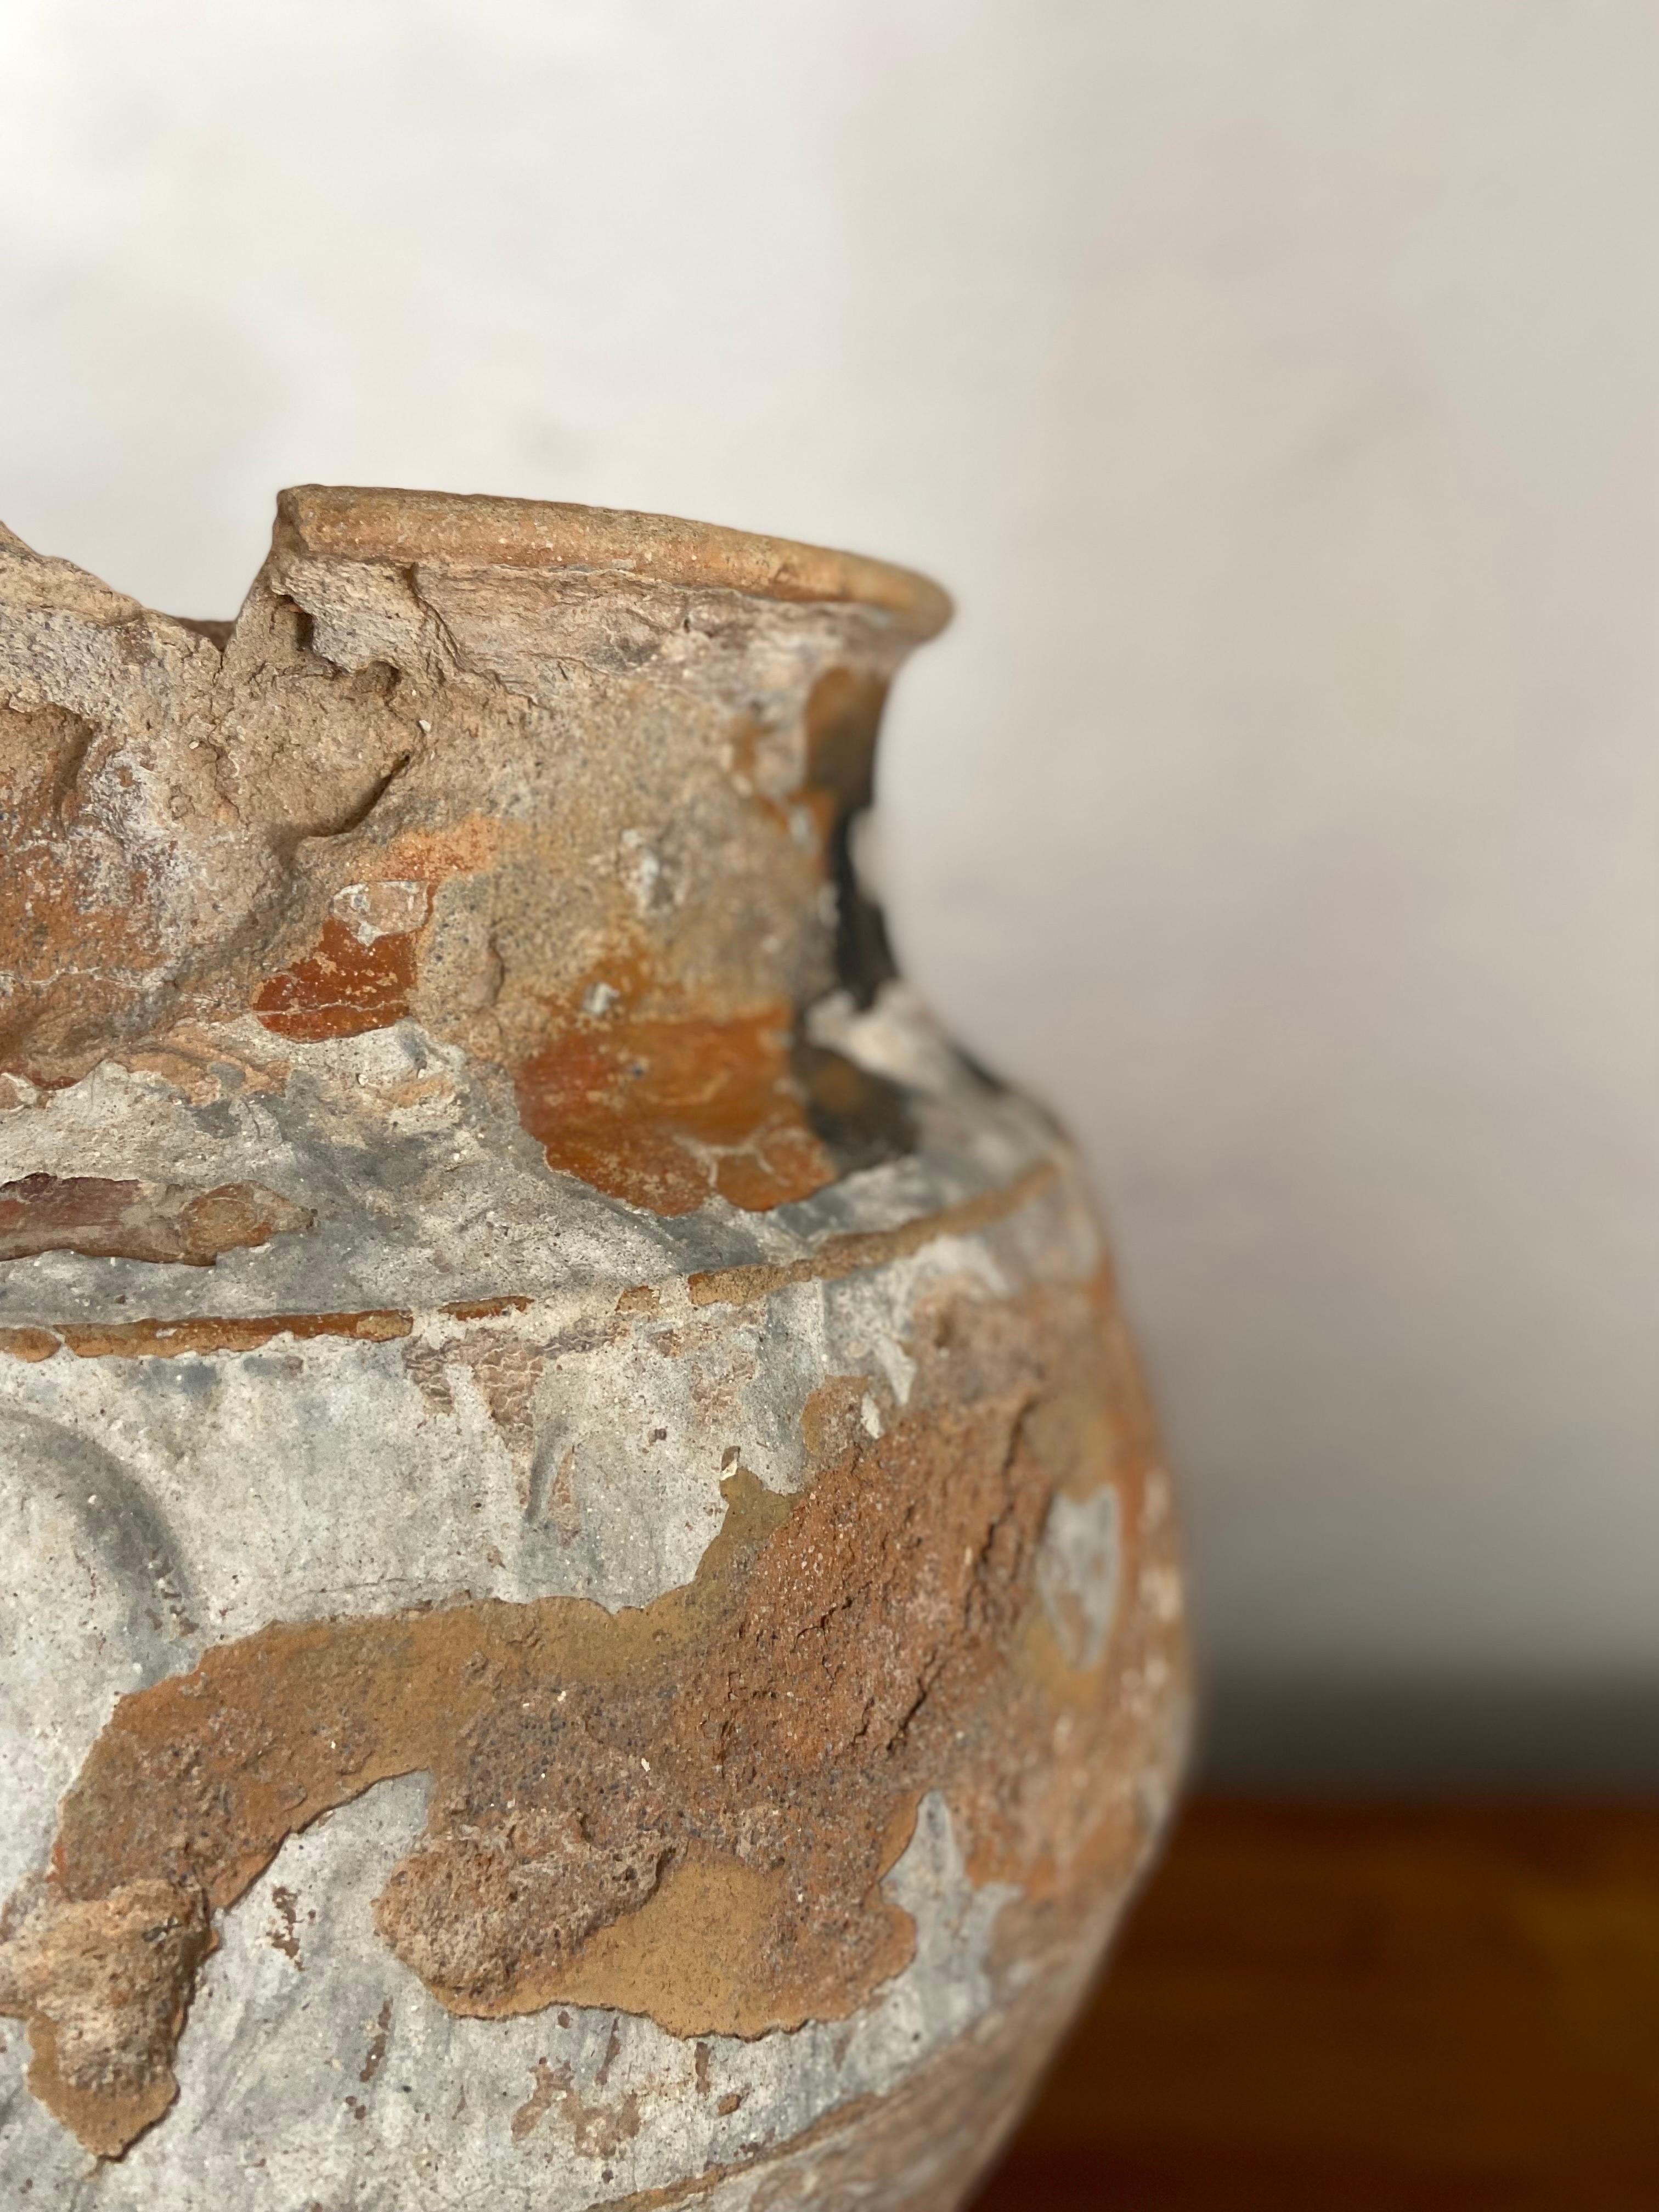 Highly distressed water jar from Central Yucatan, circa early 20th century. Bits of cement are evident on the vessel.